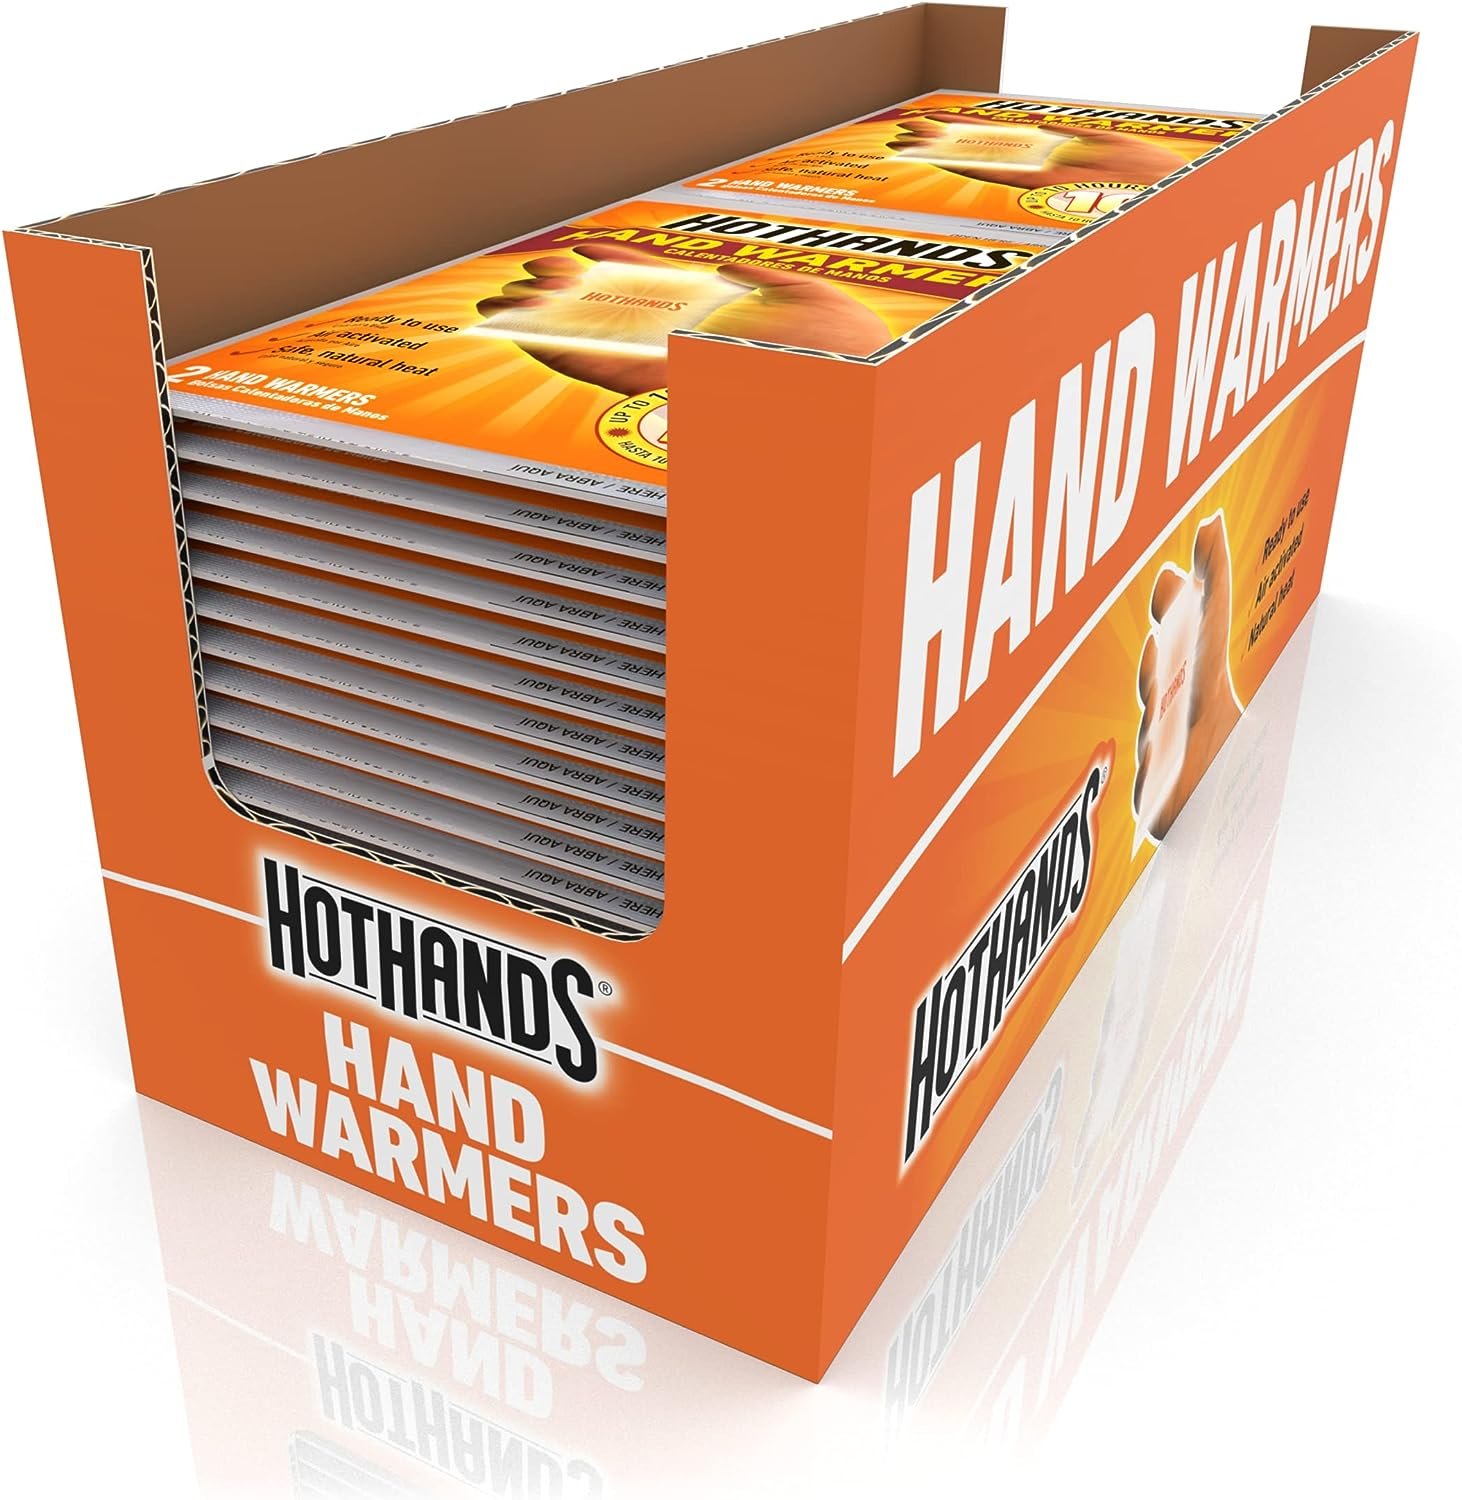 HotHands Hand Warmers - Natural Odorless Air Activated Warmers - Up to 10 Hours of Heat - 40 Pair